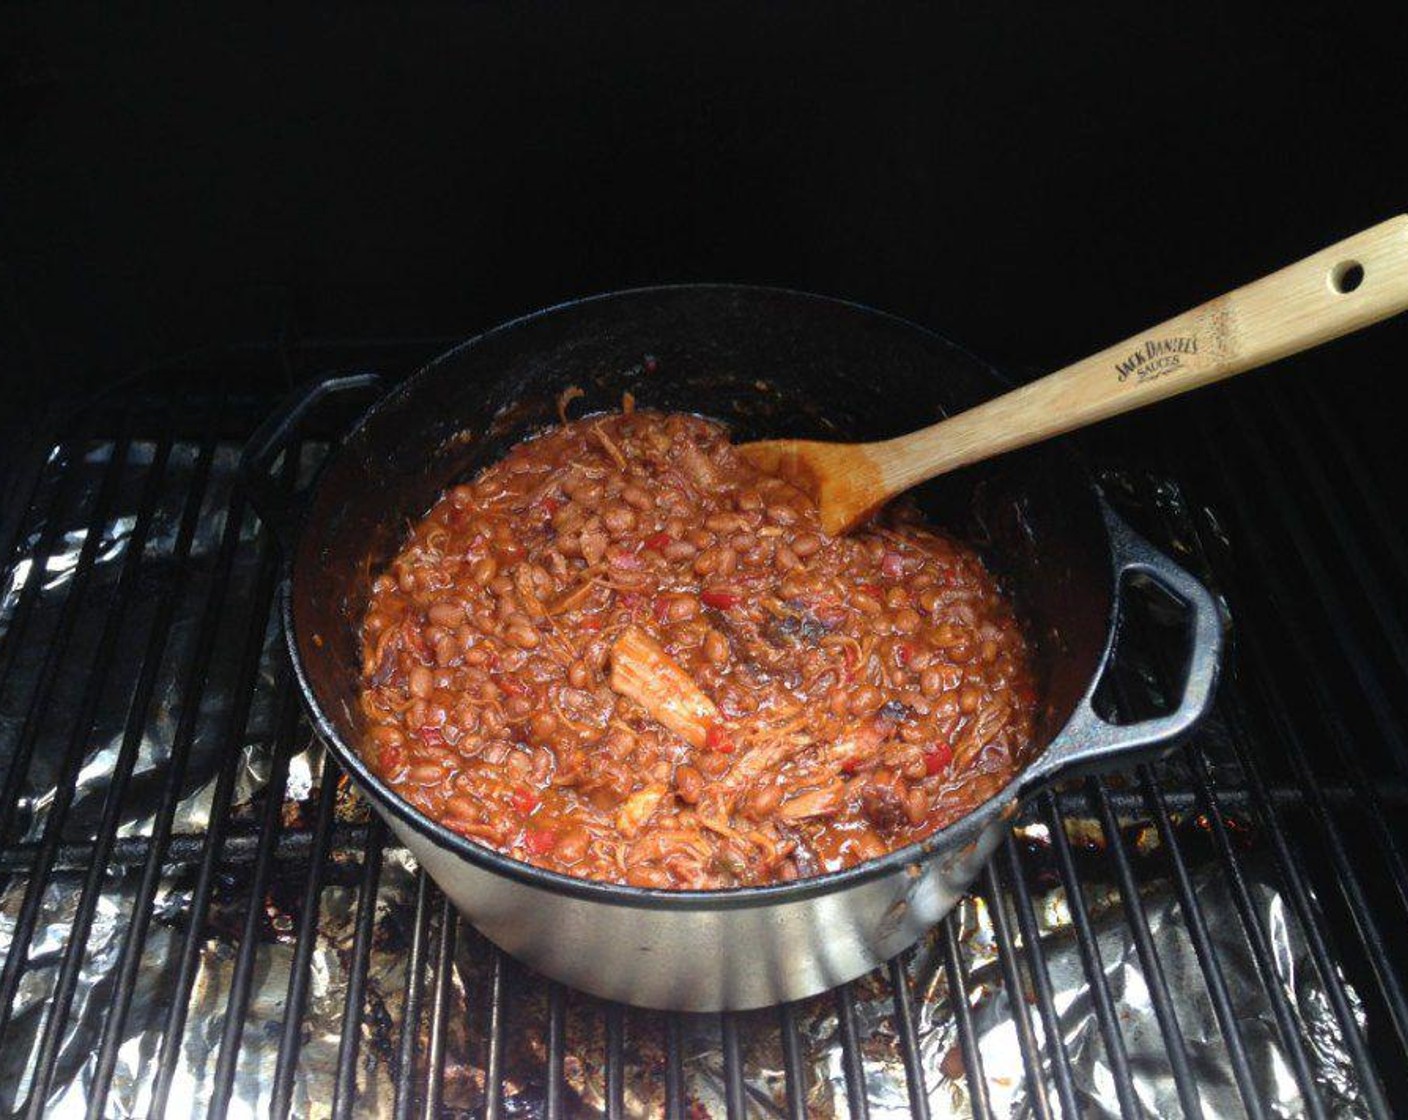 step 1 Mix Baked Beans (1 cup), Red Onion (1/2), Red Bell Pepper (1), {@10:}, Brown Sugar (3/4 cup), Barbecue Sauce (1 cup), Worcestershire Sauce (1 Tbsp), Yellow Mustard (1 Tbsp), Barbecue Rub (1 Tbsp), All-Purpose Spice Rub (to taste) and Pulled Pork (1 cup).